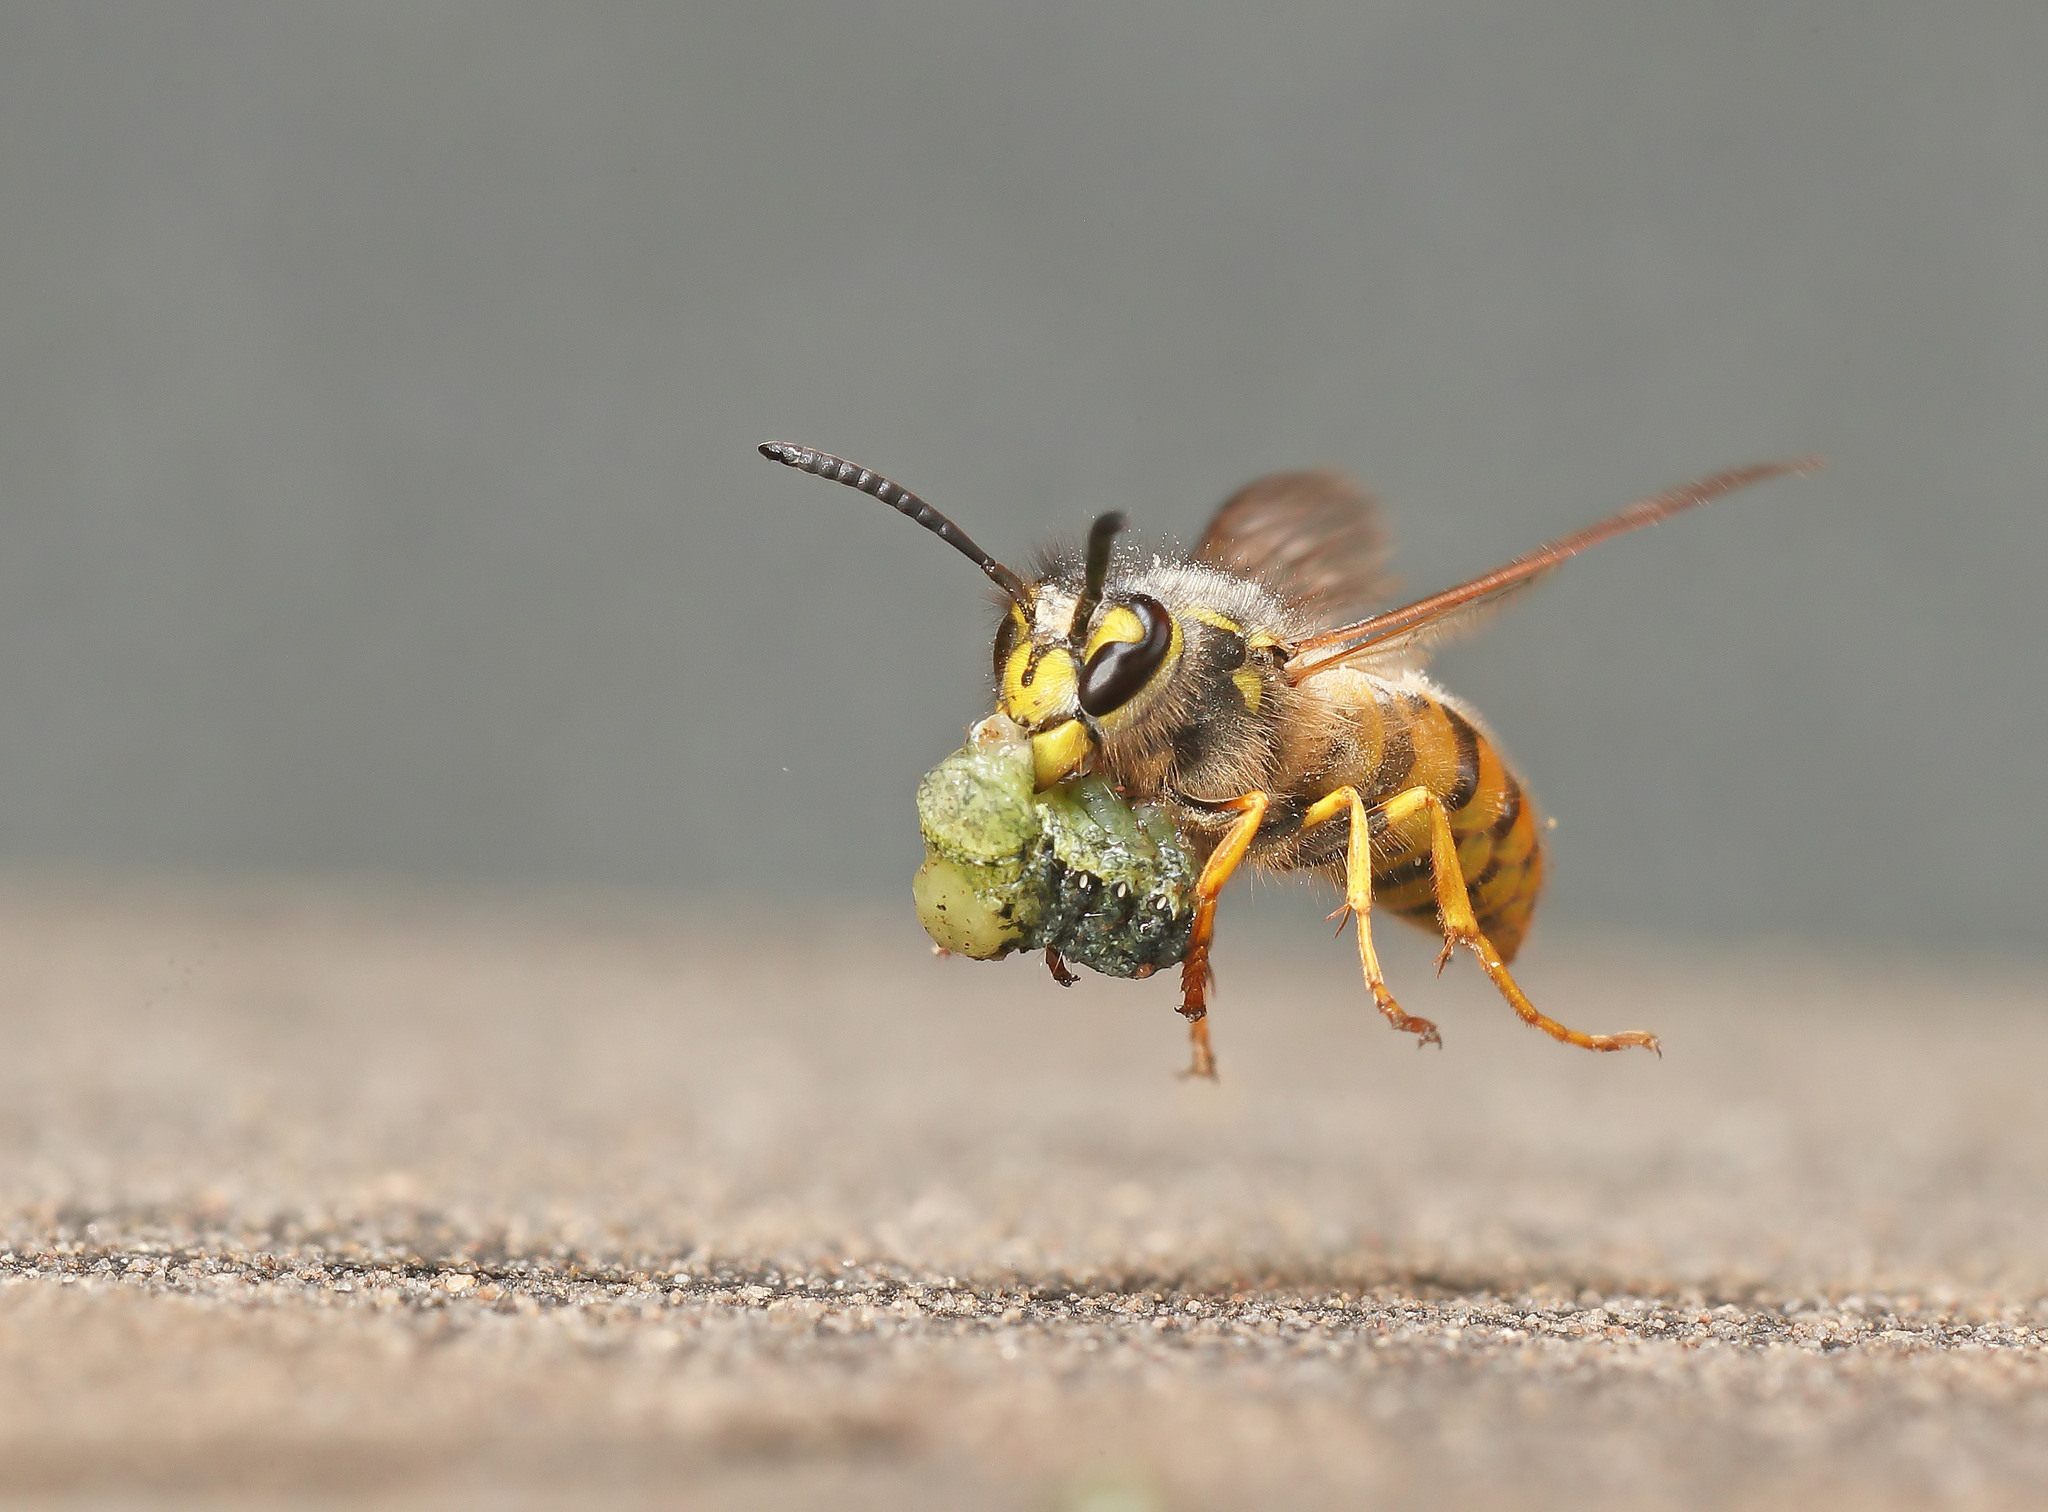 Wasp in flight carrying a chewed caterpillar. by Roy rimmer